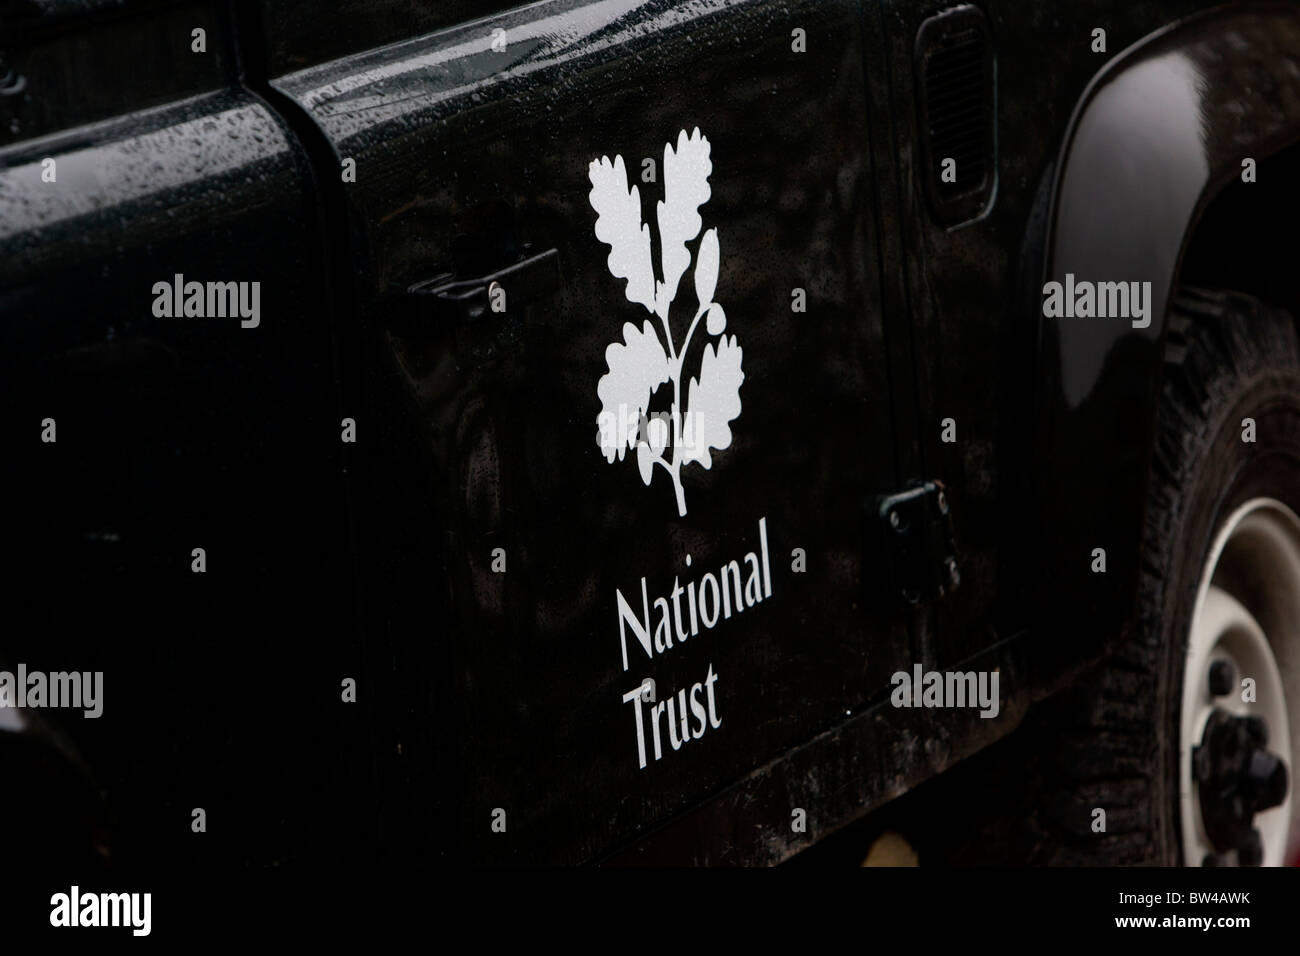 National Trust logo on the side of a Land Rover, East Sussex, UK. Stock Photo